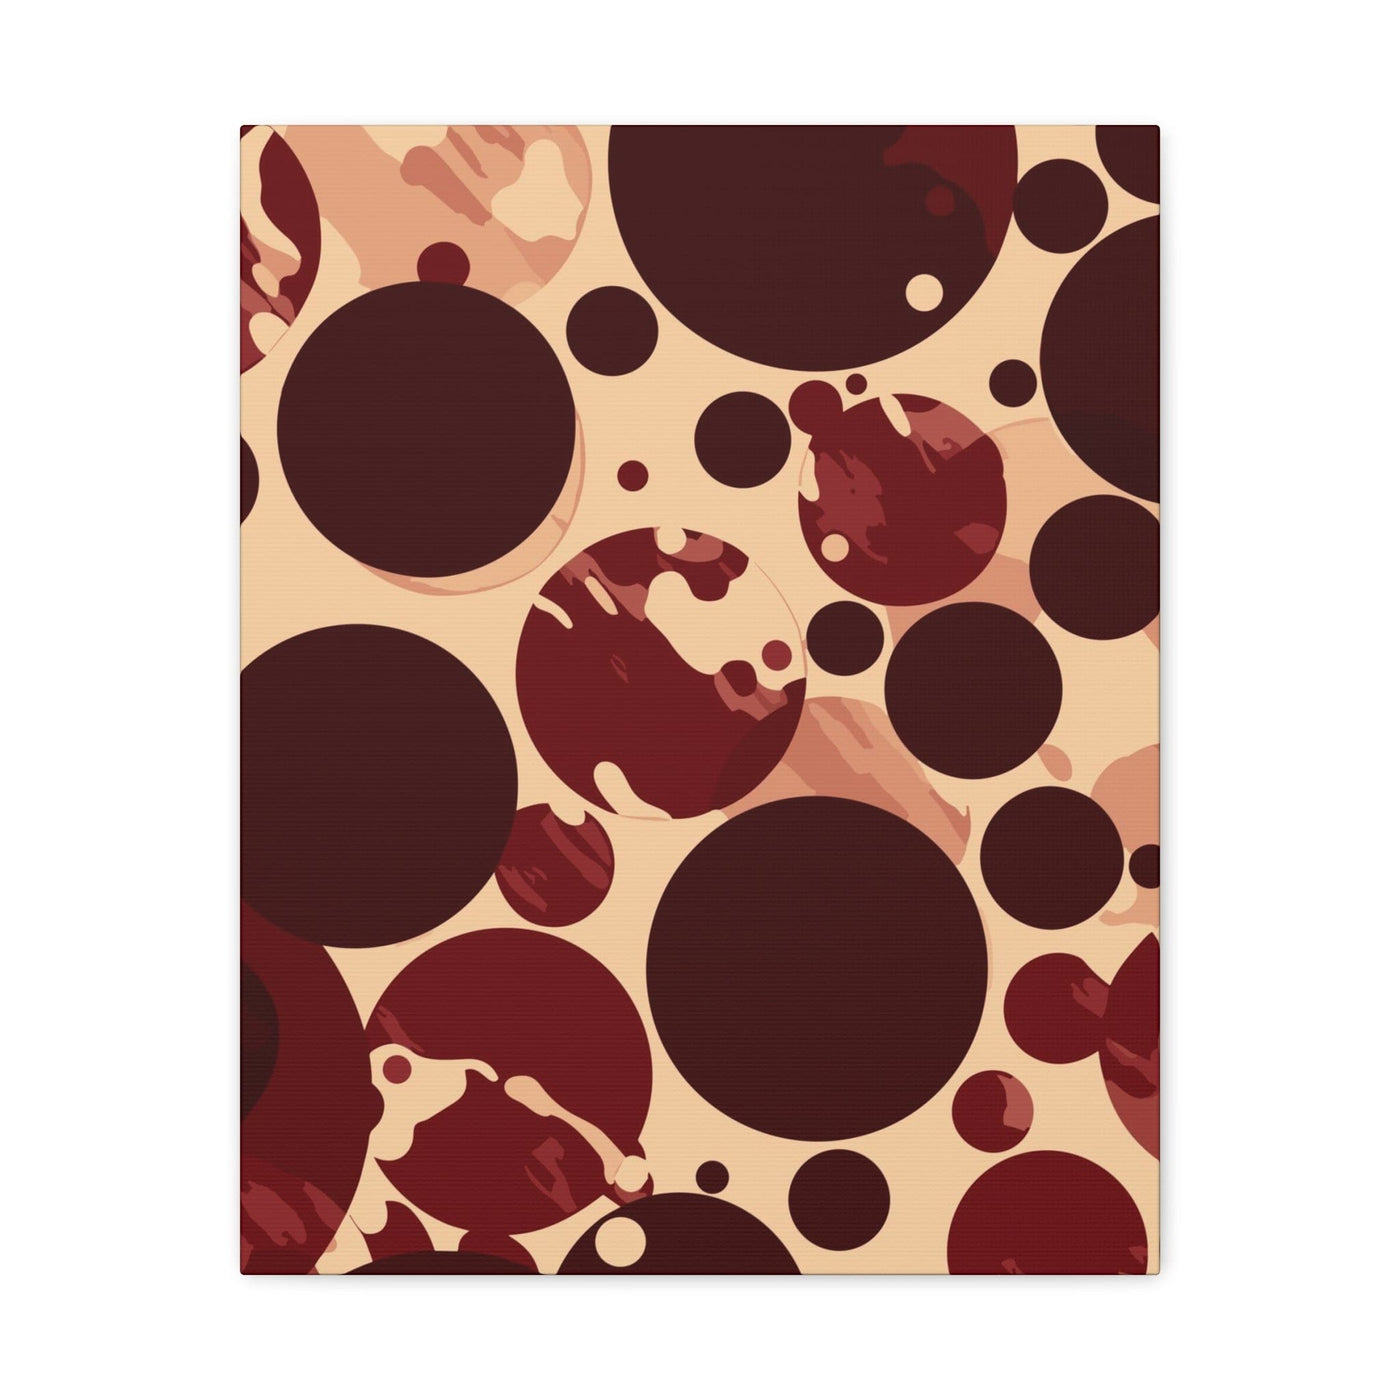 Wall Art Decor Canvas Print Artwork Burgundy And Beige Circular Spotted